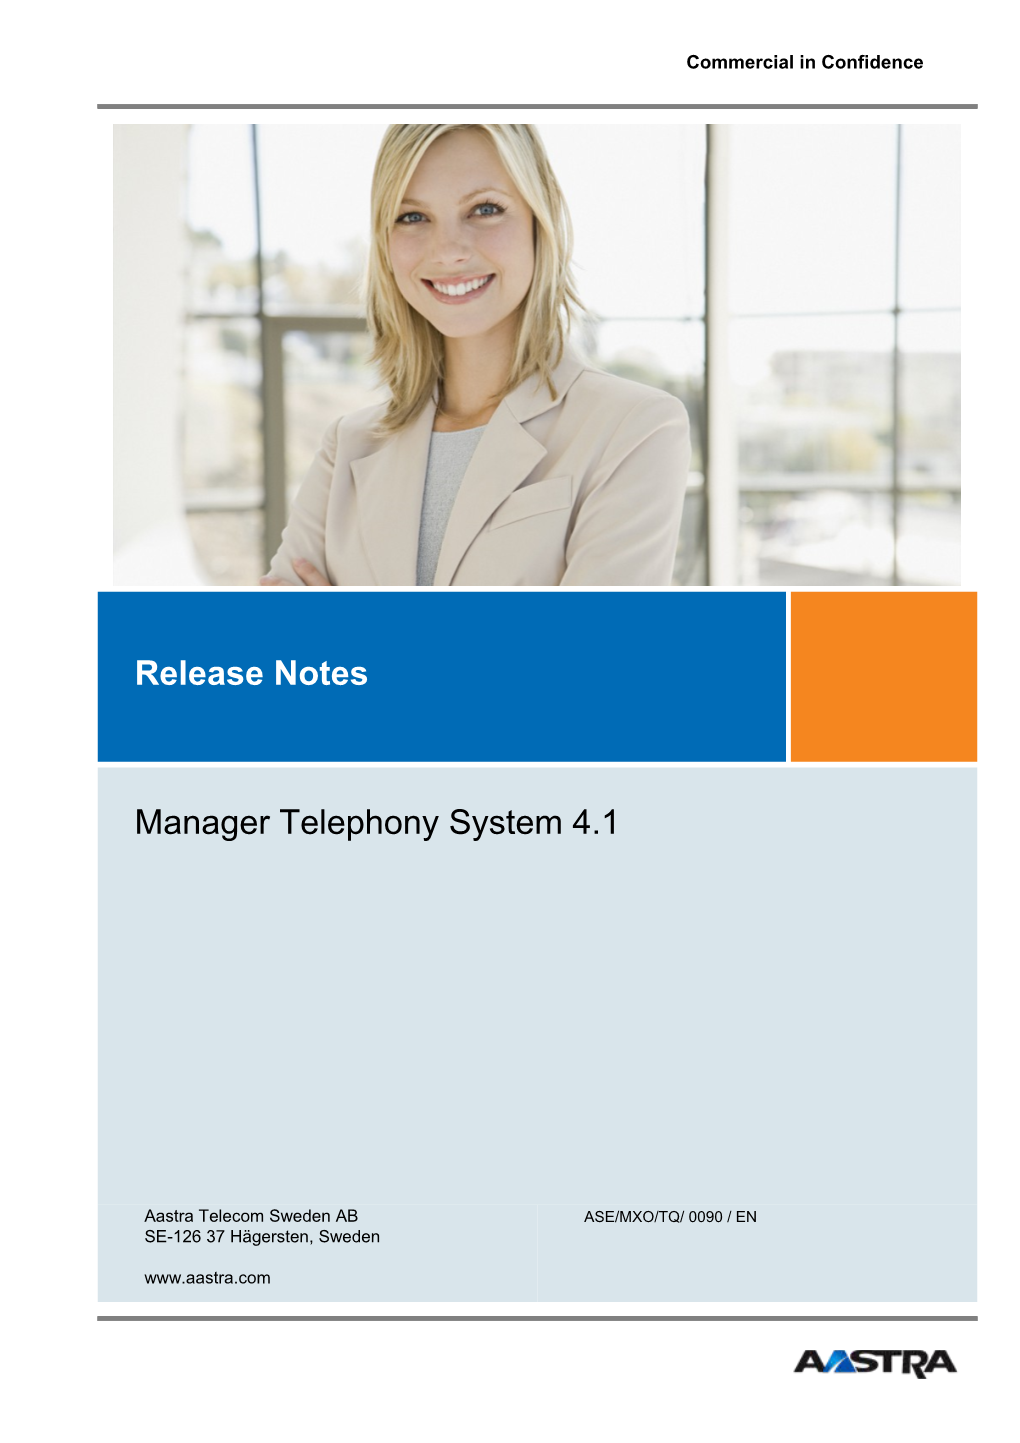 Release Notes Manager Provisioning 1.0 Service Pack 1